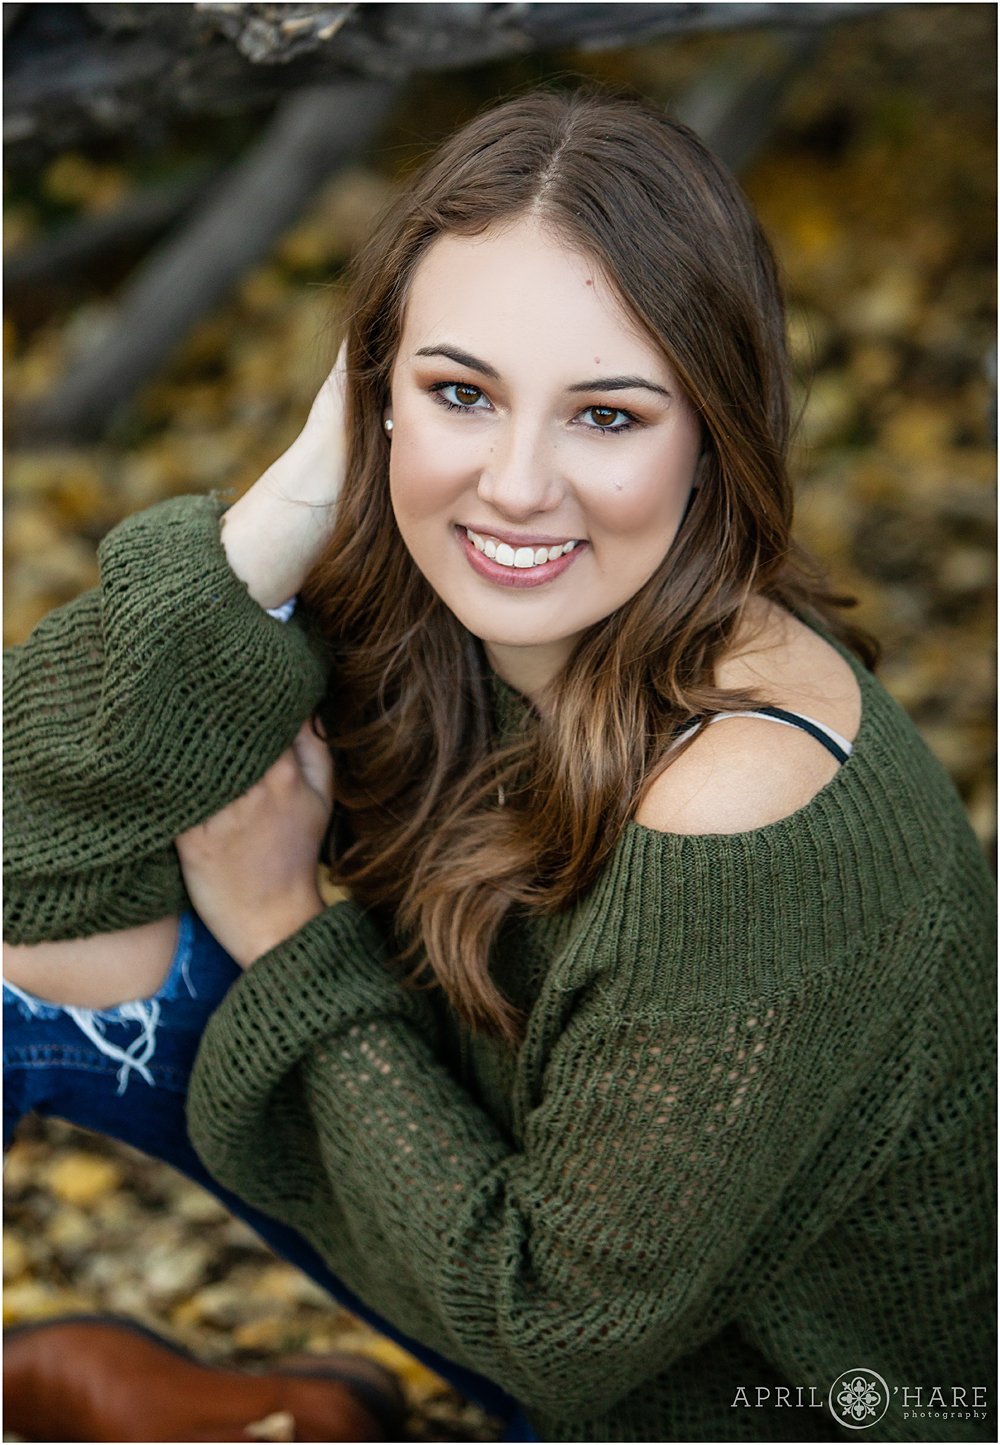 High school yearbook photography in Colorado